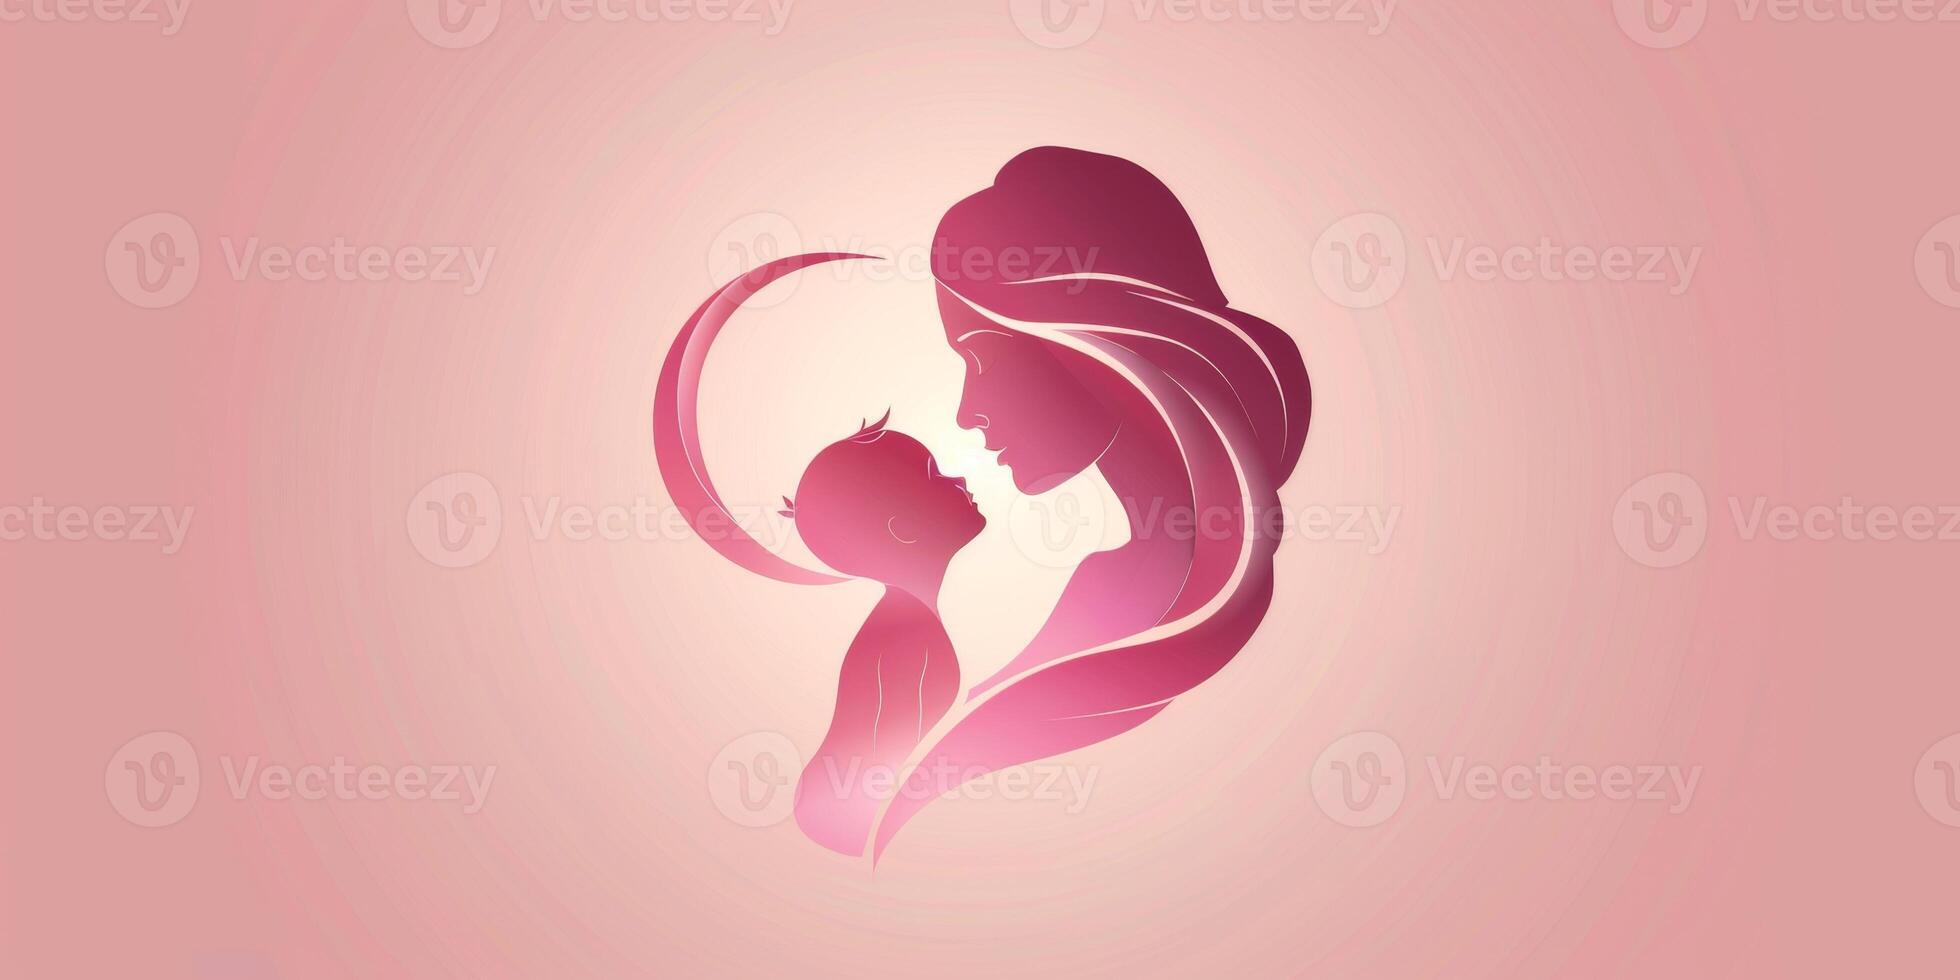 mother with child concept logo photo